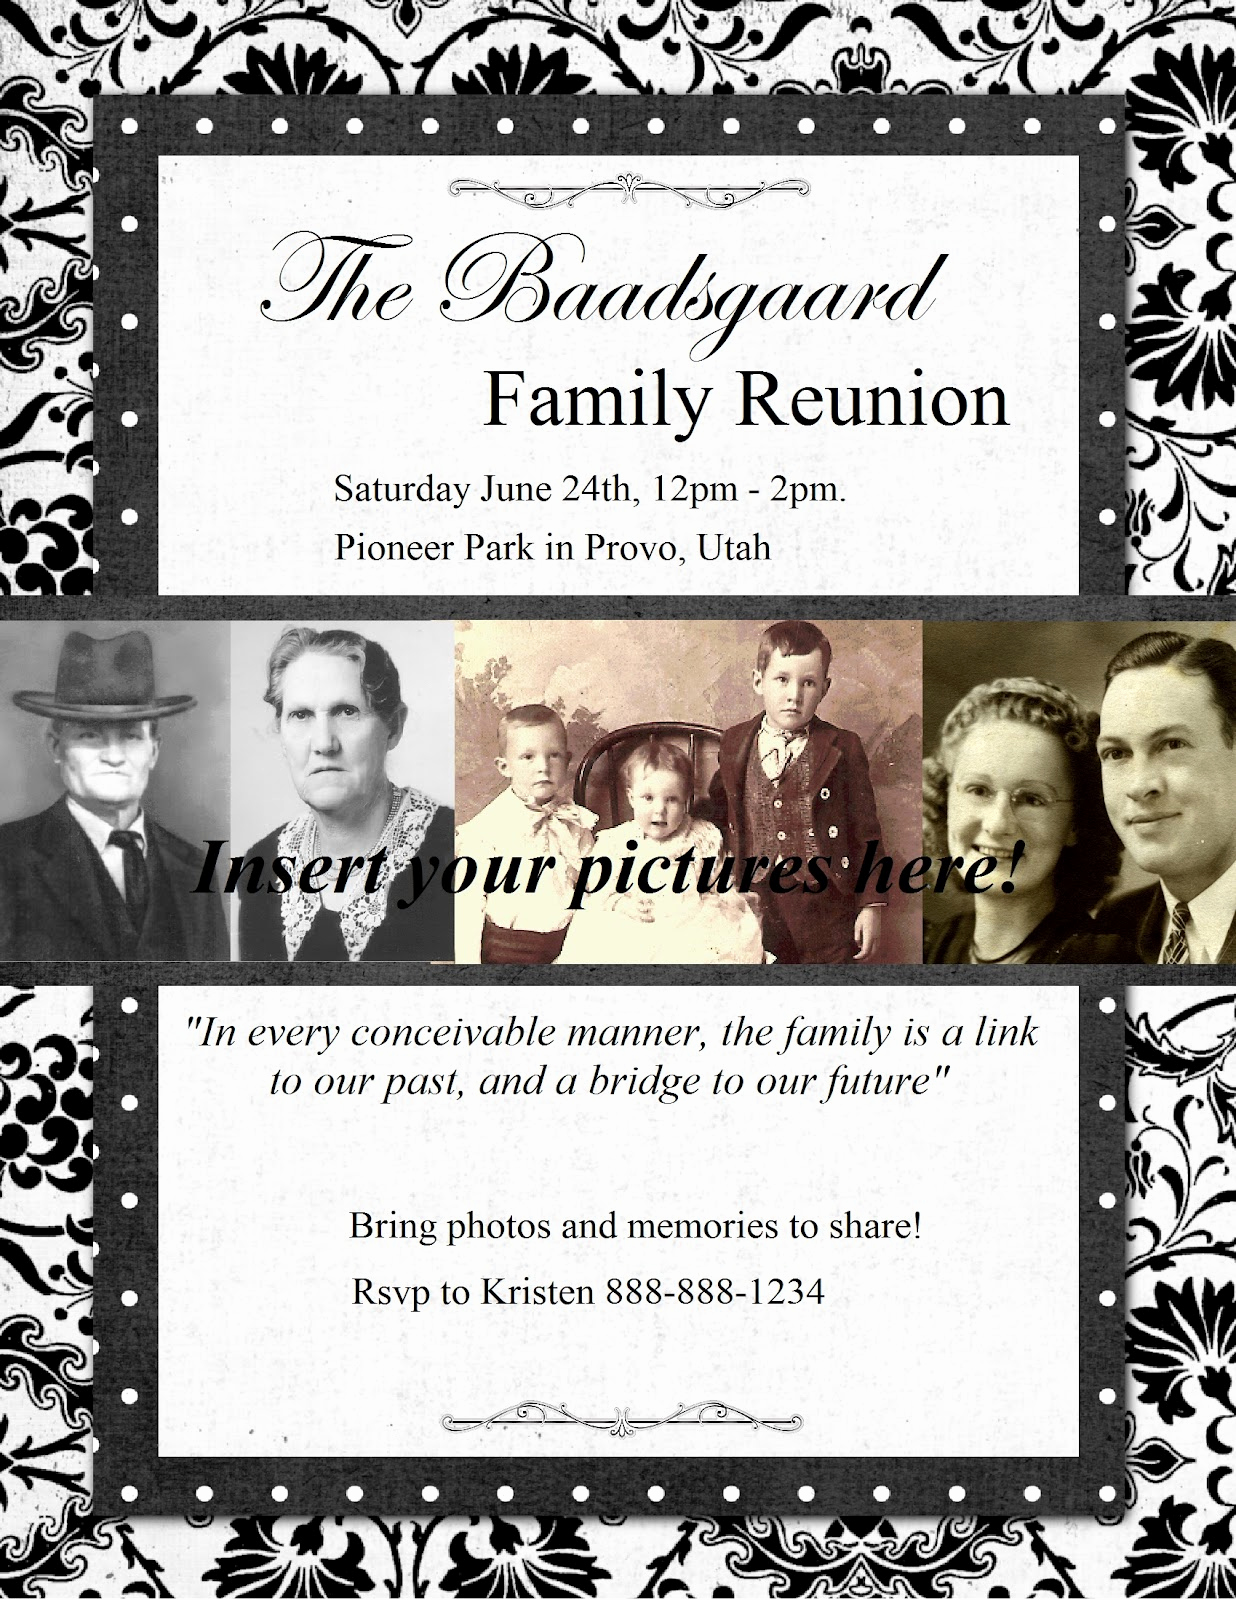 Family Reunion Flyers Templates New Heritage Collector Storybook Family Reunion Flyers